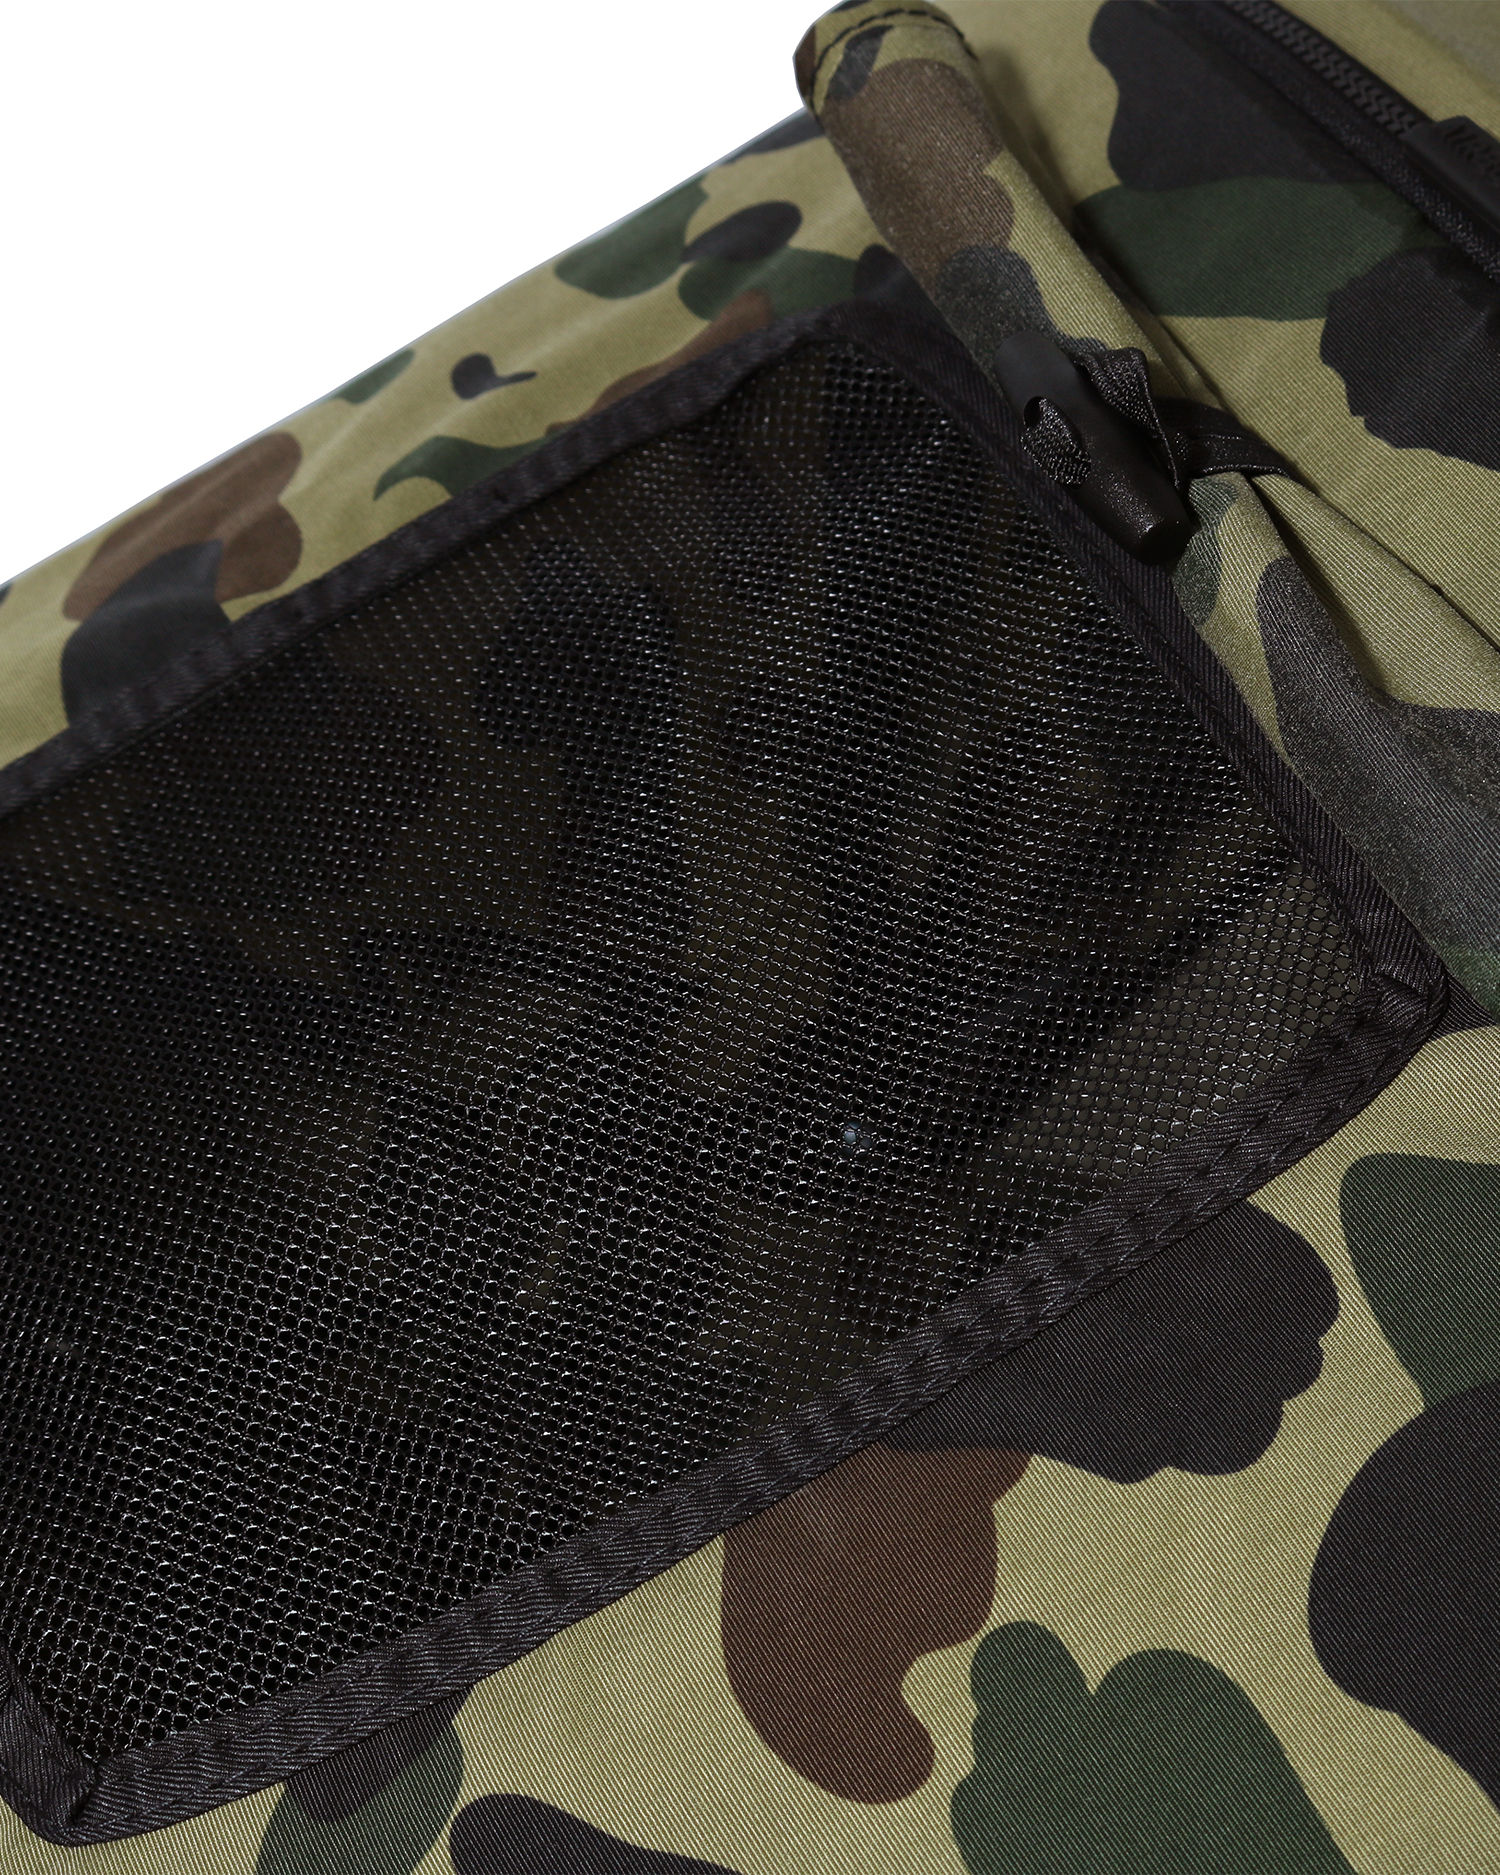 Shop X Airbuggy 1st Camo Airbuggy Stroller Online | BAPE